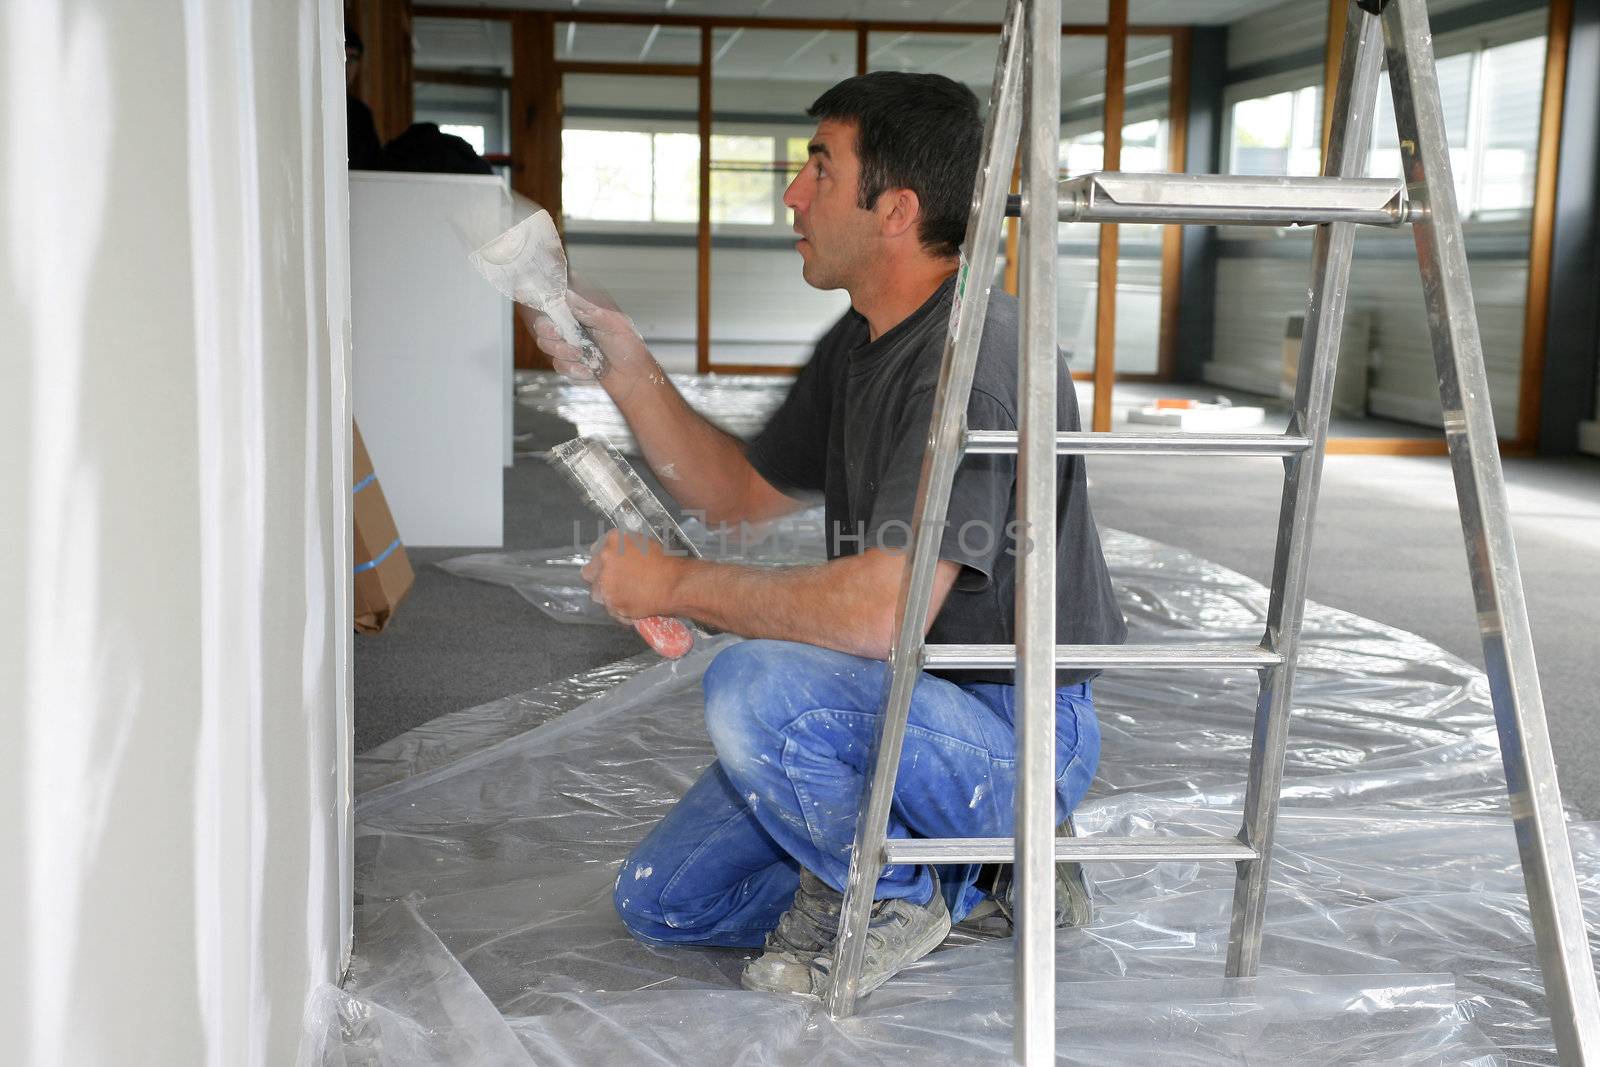 Decorator painting a room by phovoir